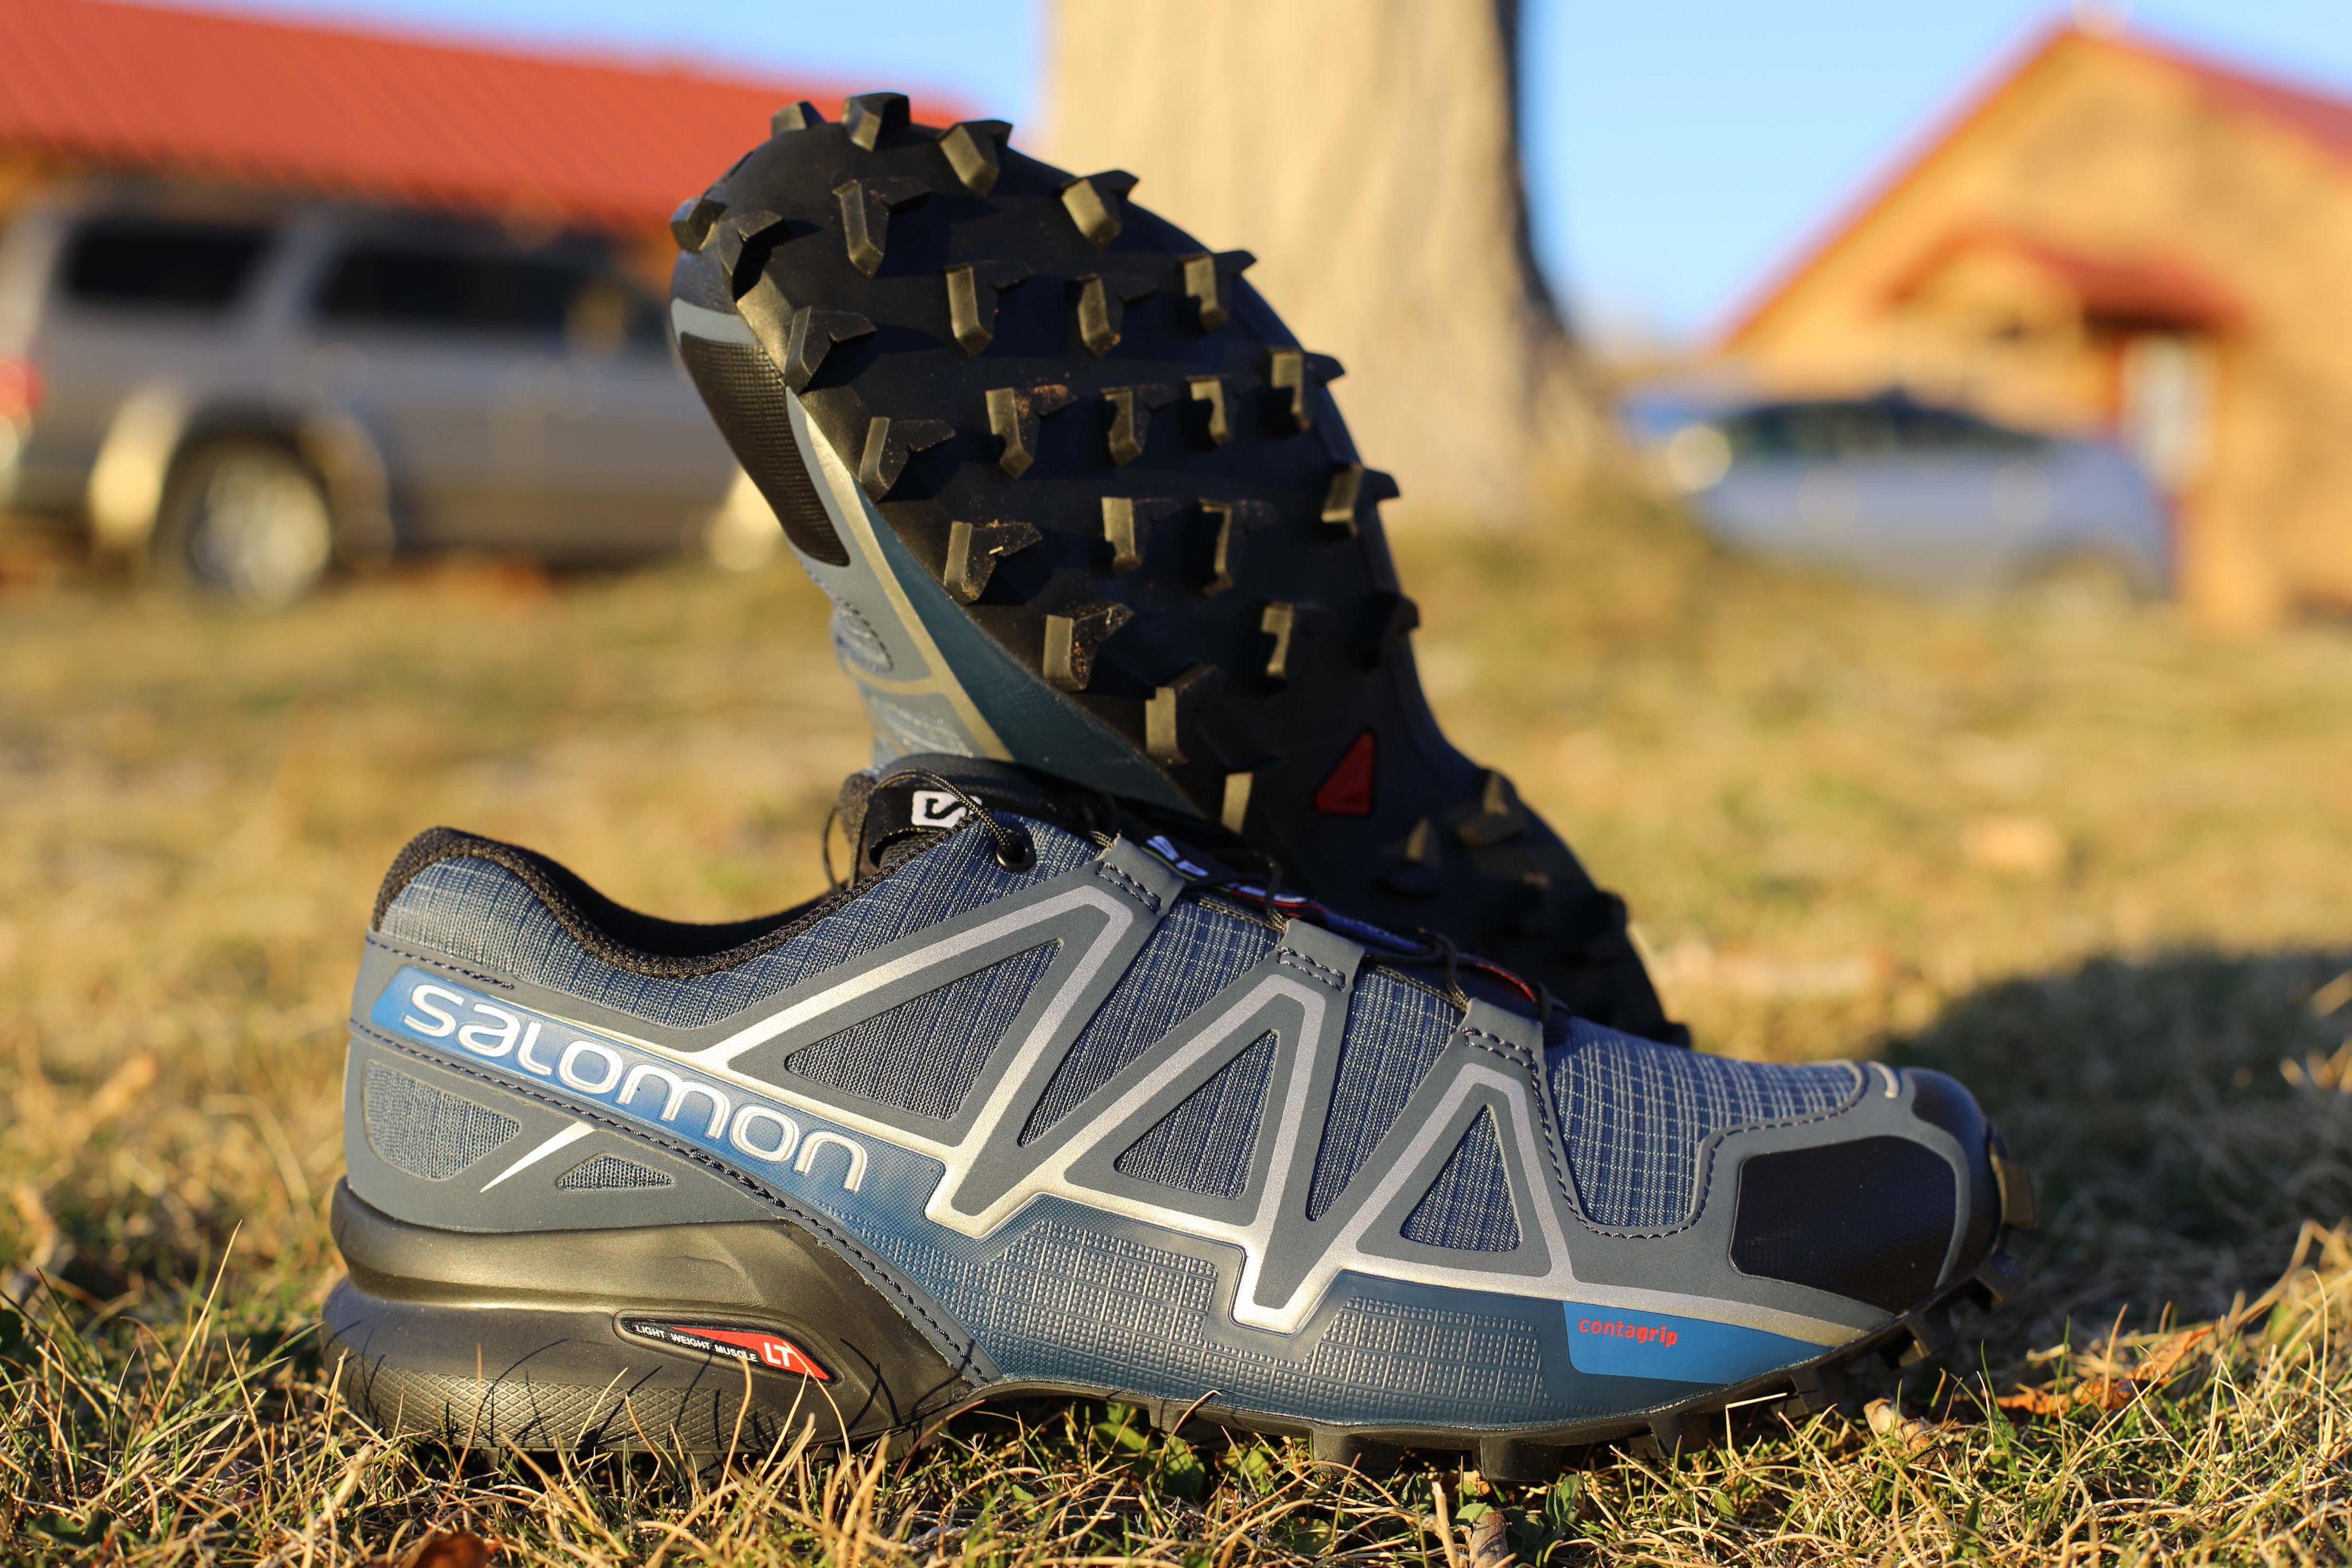 iRunFar on Twitter: "Read our review of the Salomon Speedcross 4, the fourth edition of narrow, glove-like mountain shoe with that famous outsole. https://t.co/WajXpuf9Tw https://t.co/1GC5r27sj7" / Twitter